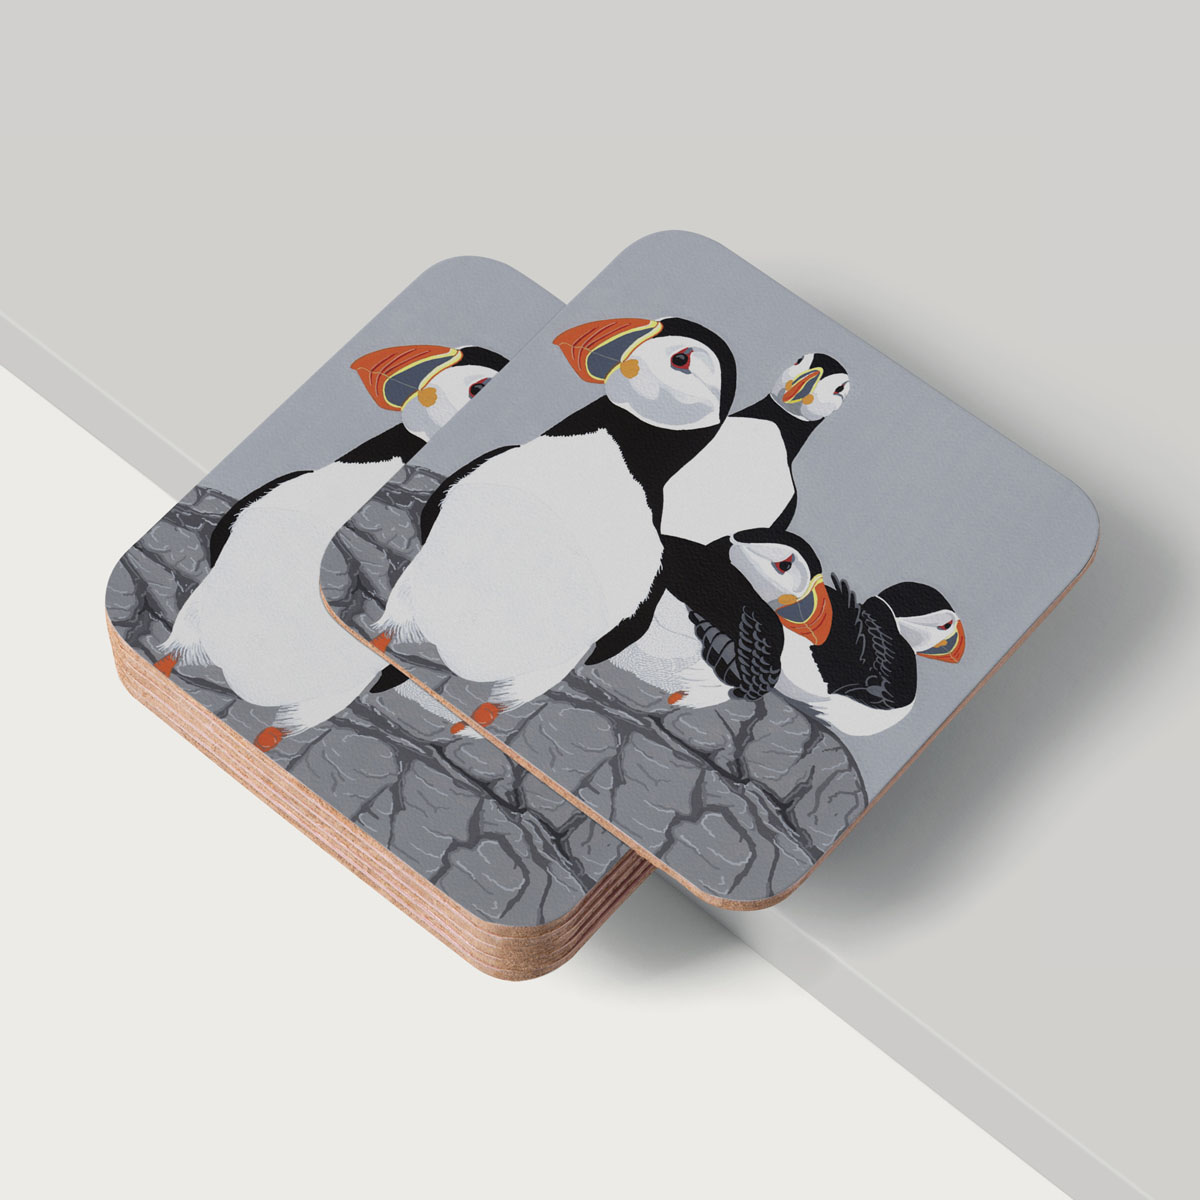 Puffinry Puffins Coaster Placemat Homewares